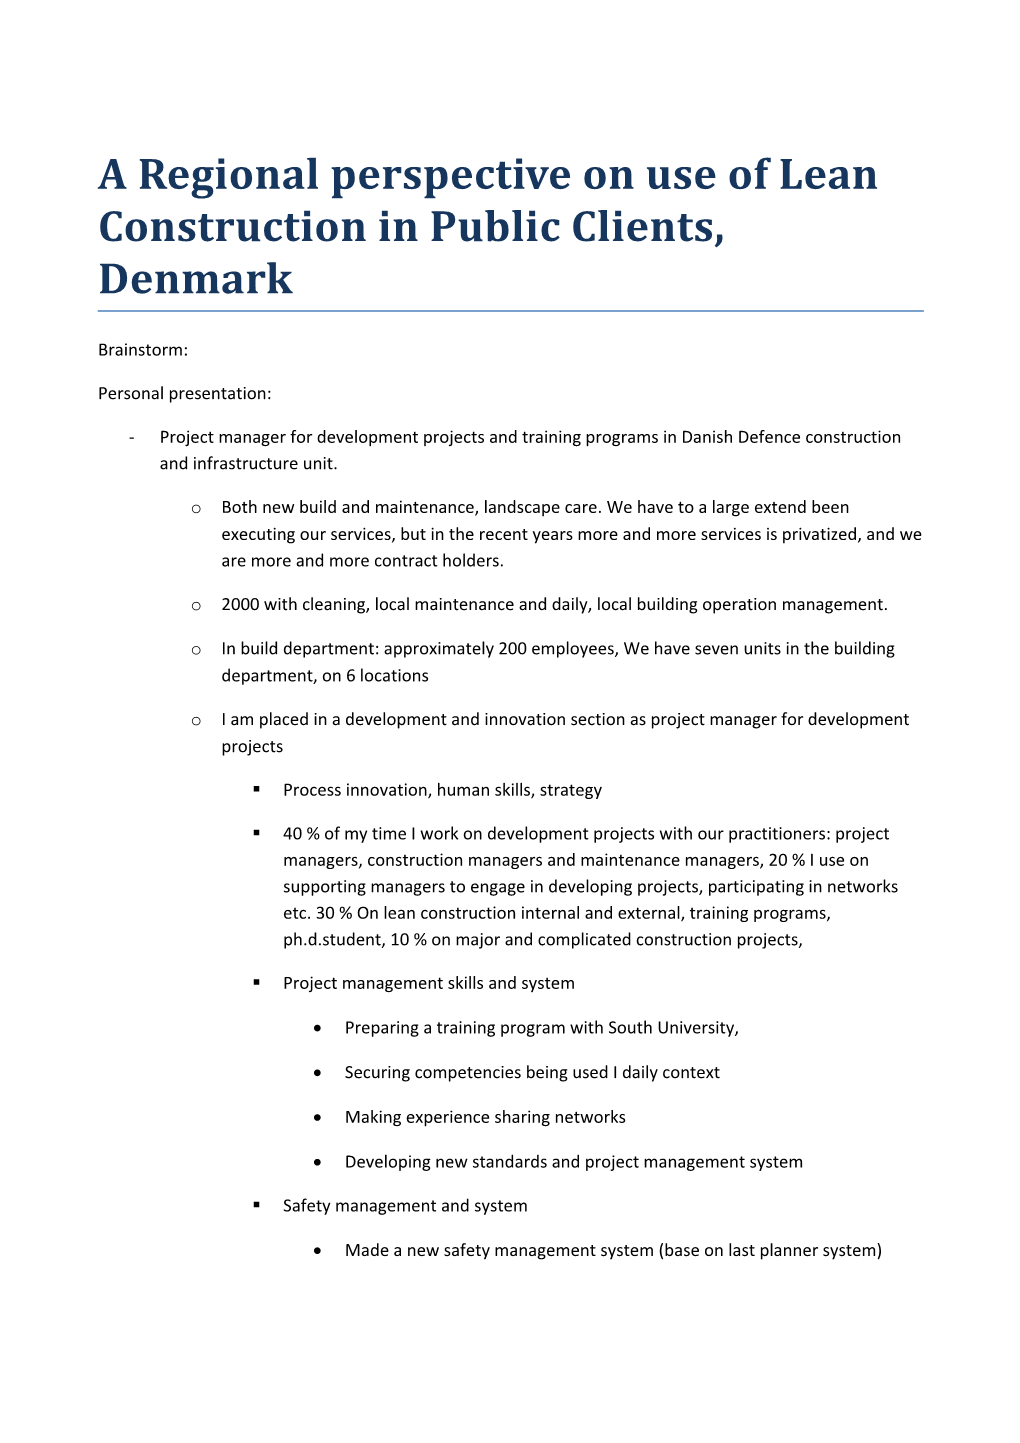 A Regional Perspective on Use of Lean Construction in Public Clients, Denmark